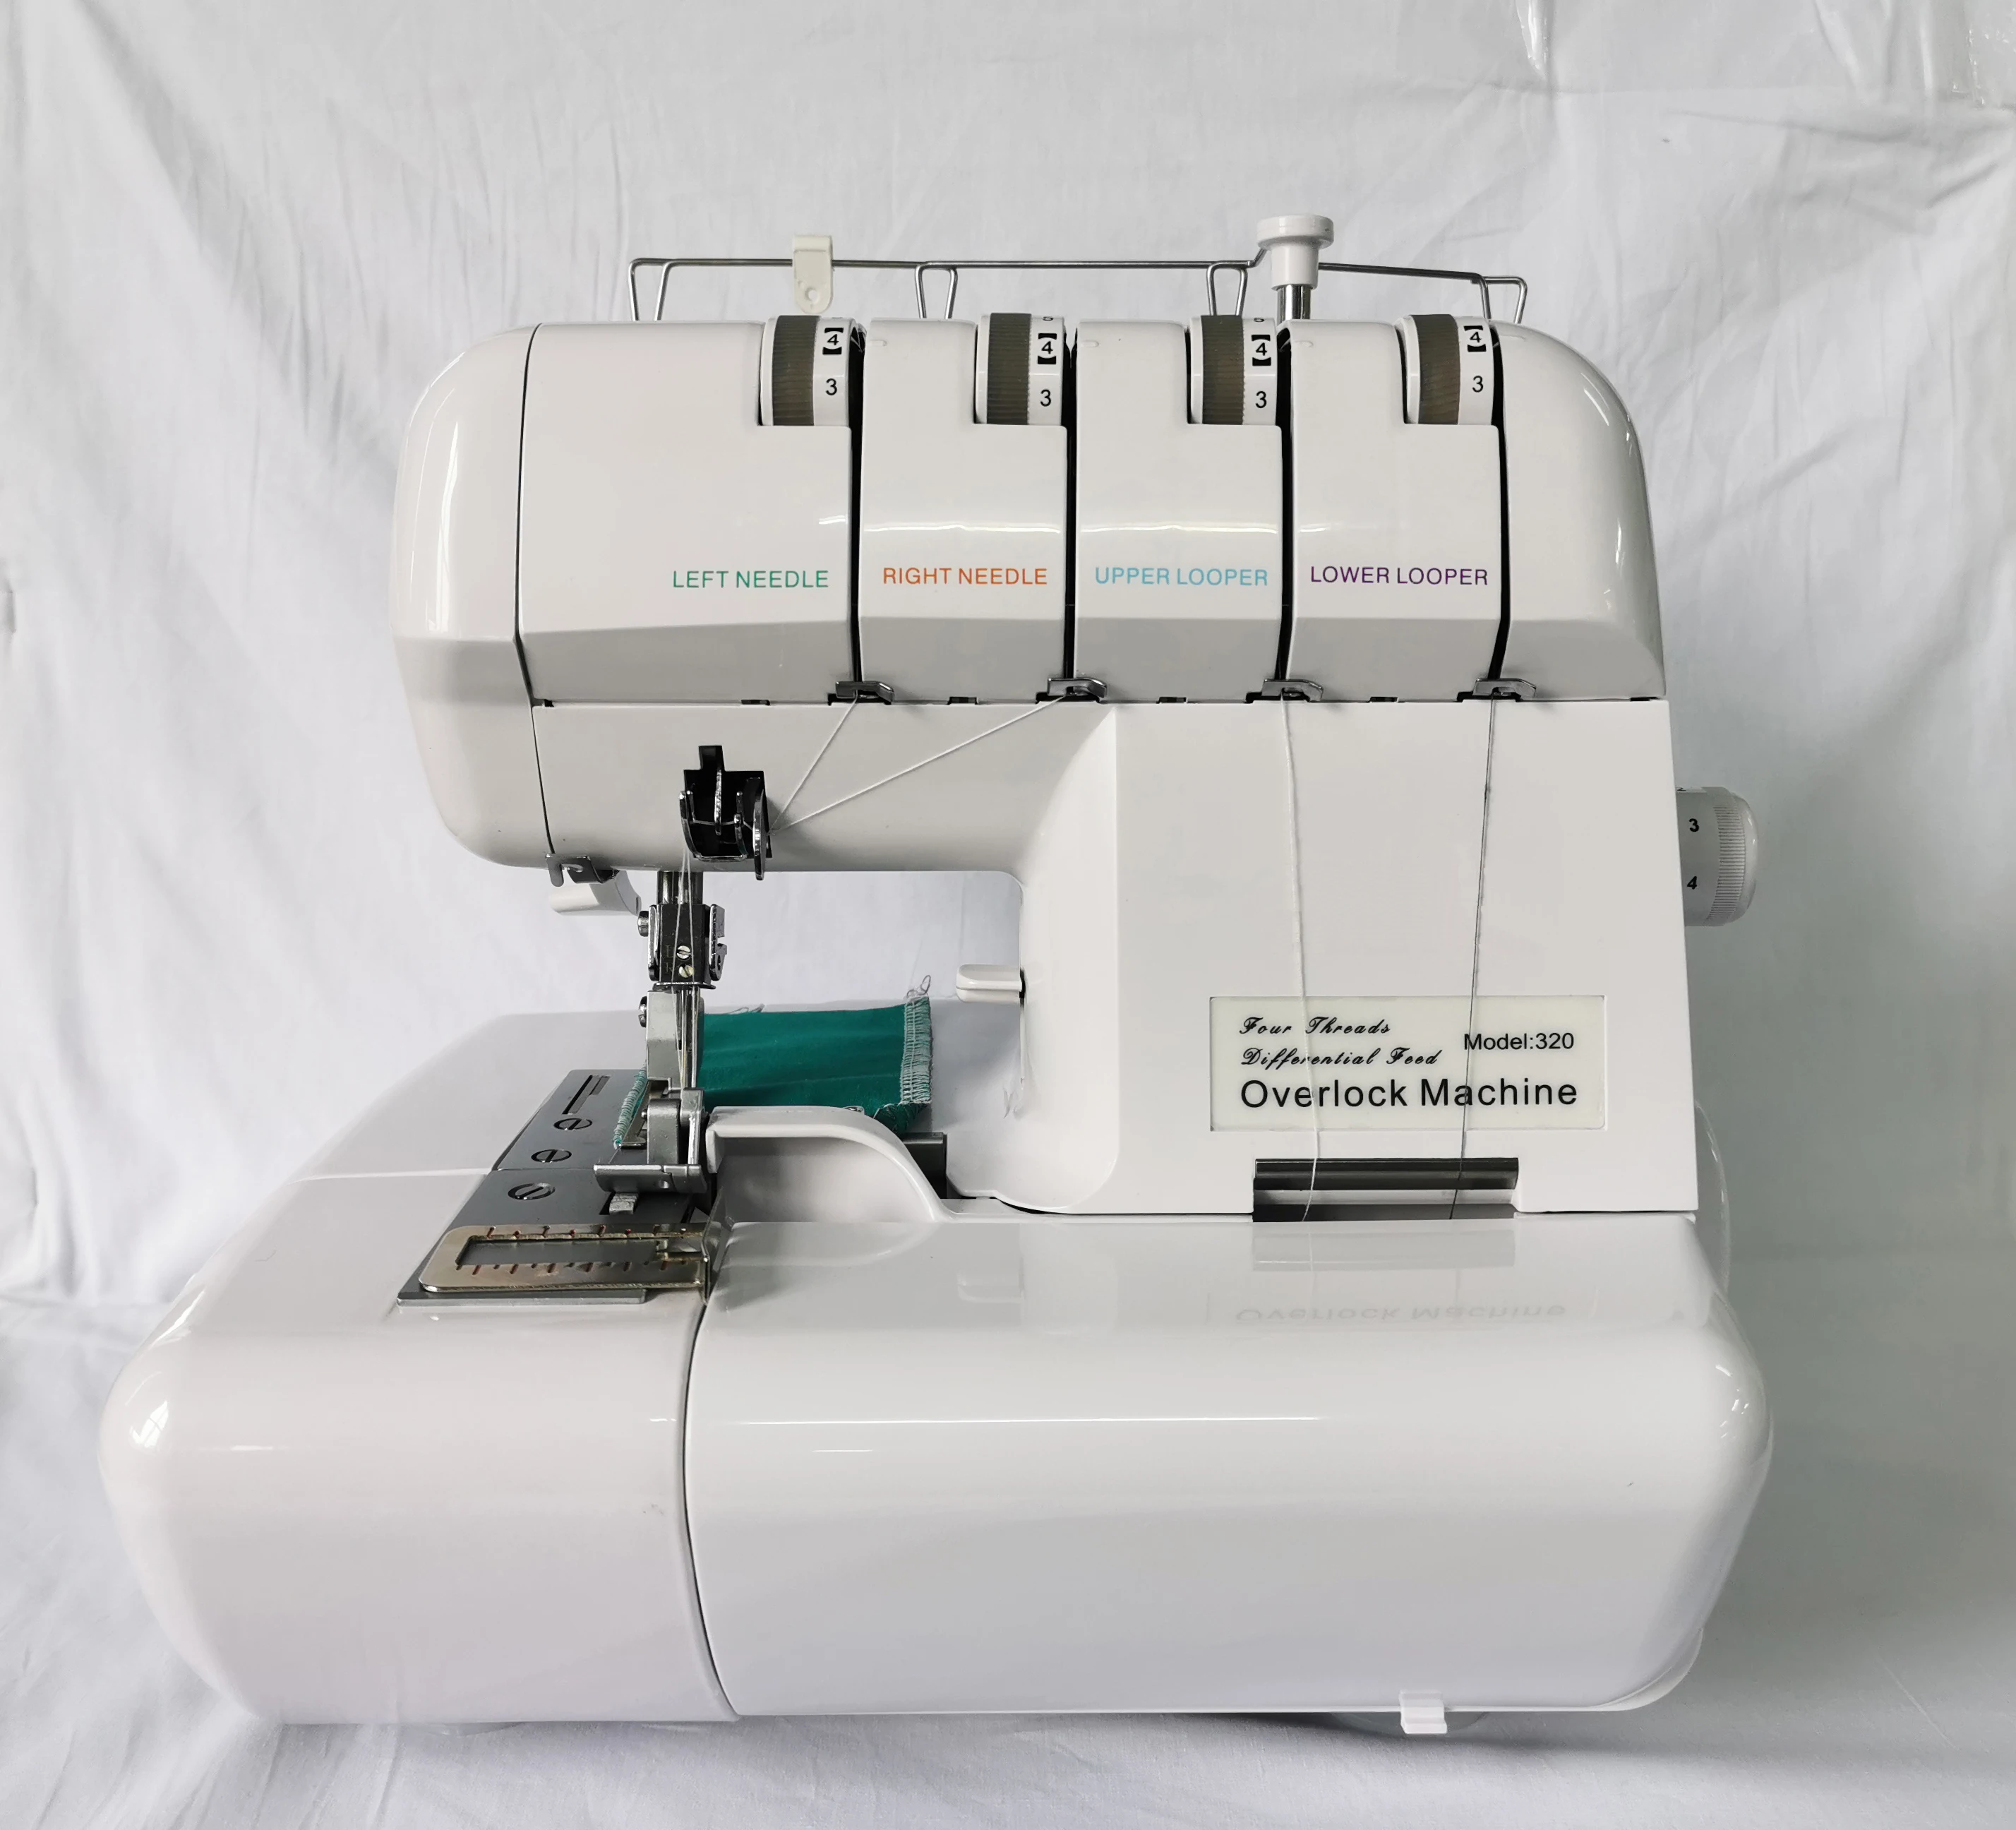 Embroidery & Darning Foot Singer 320 Model Sewing Machine – The